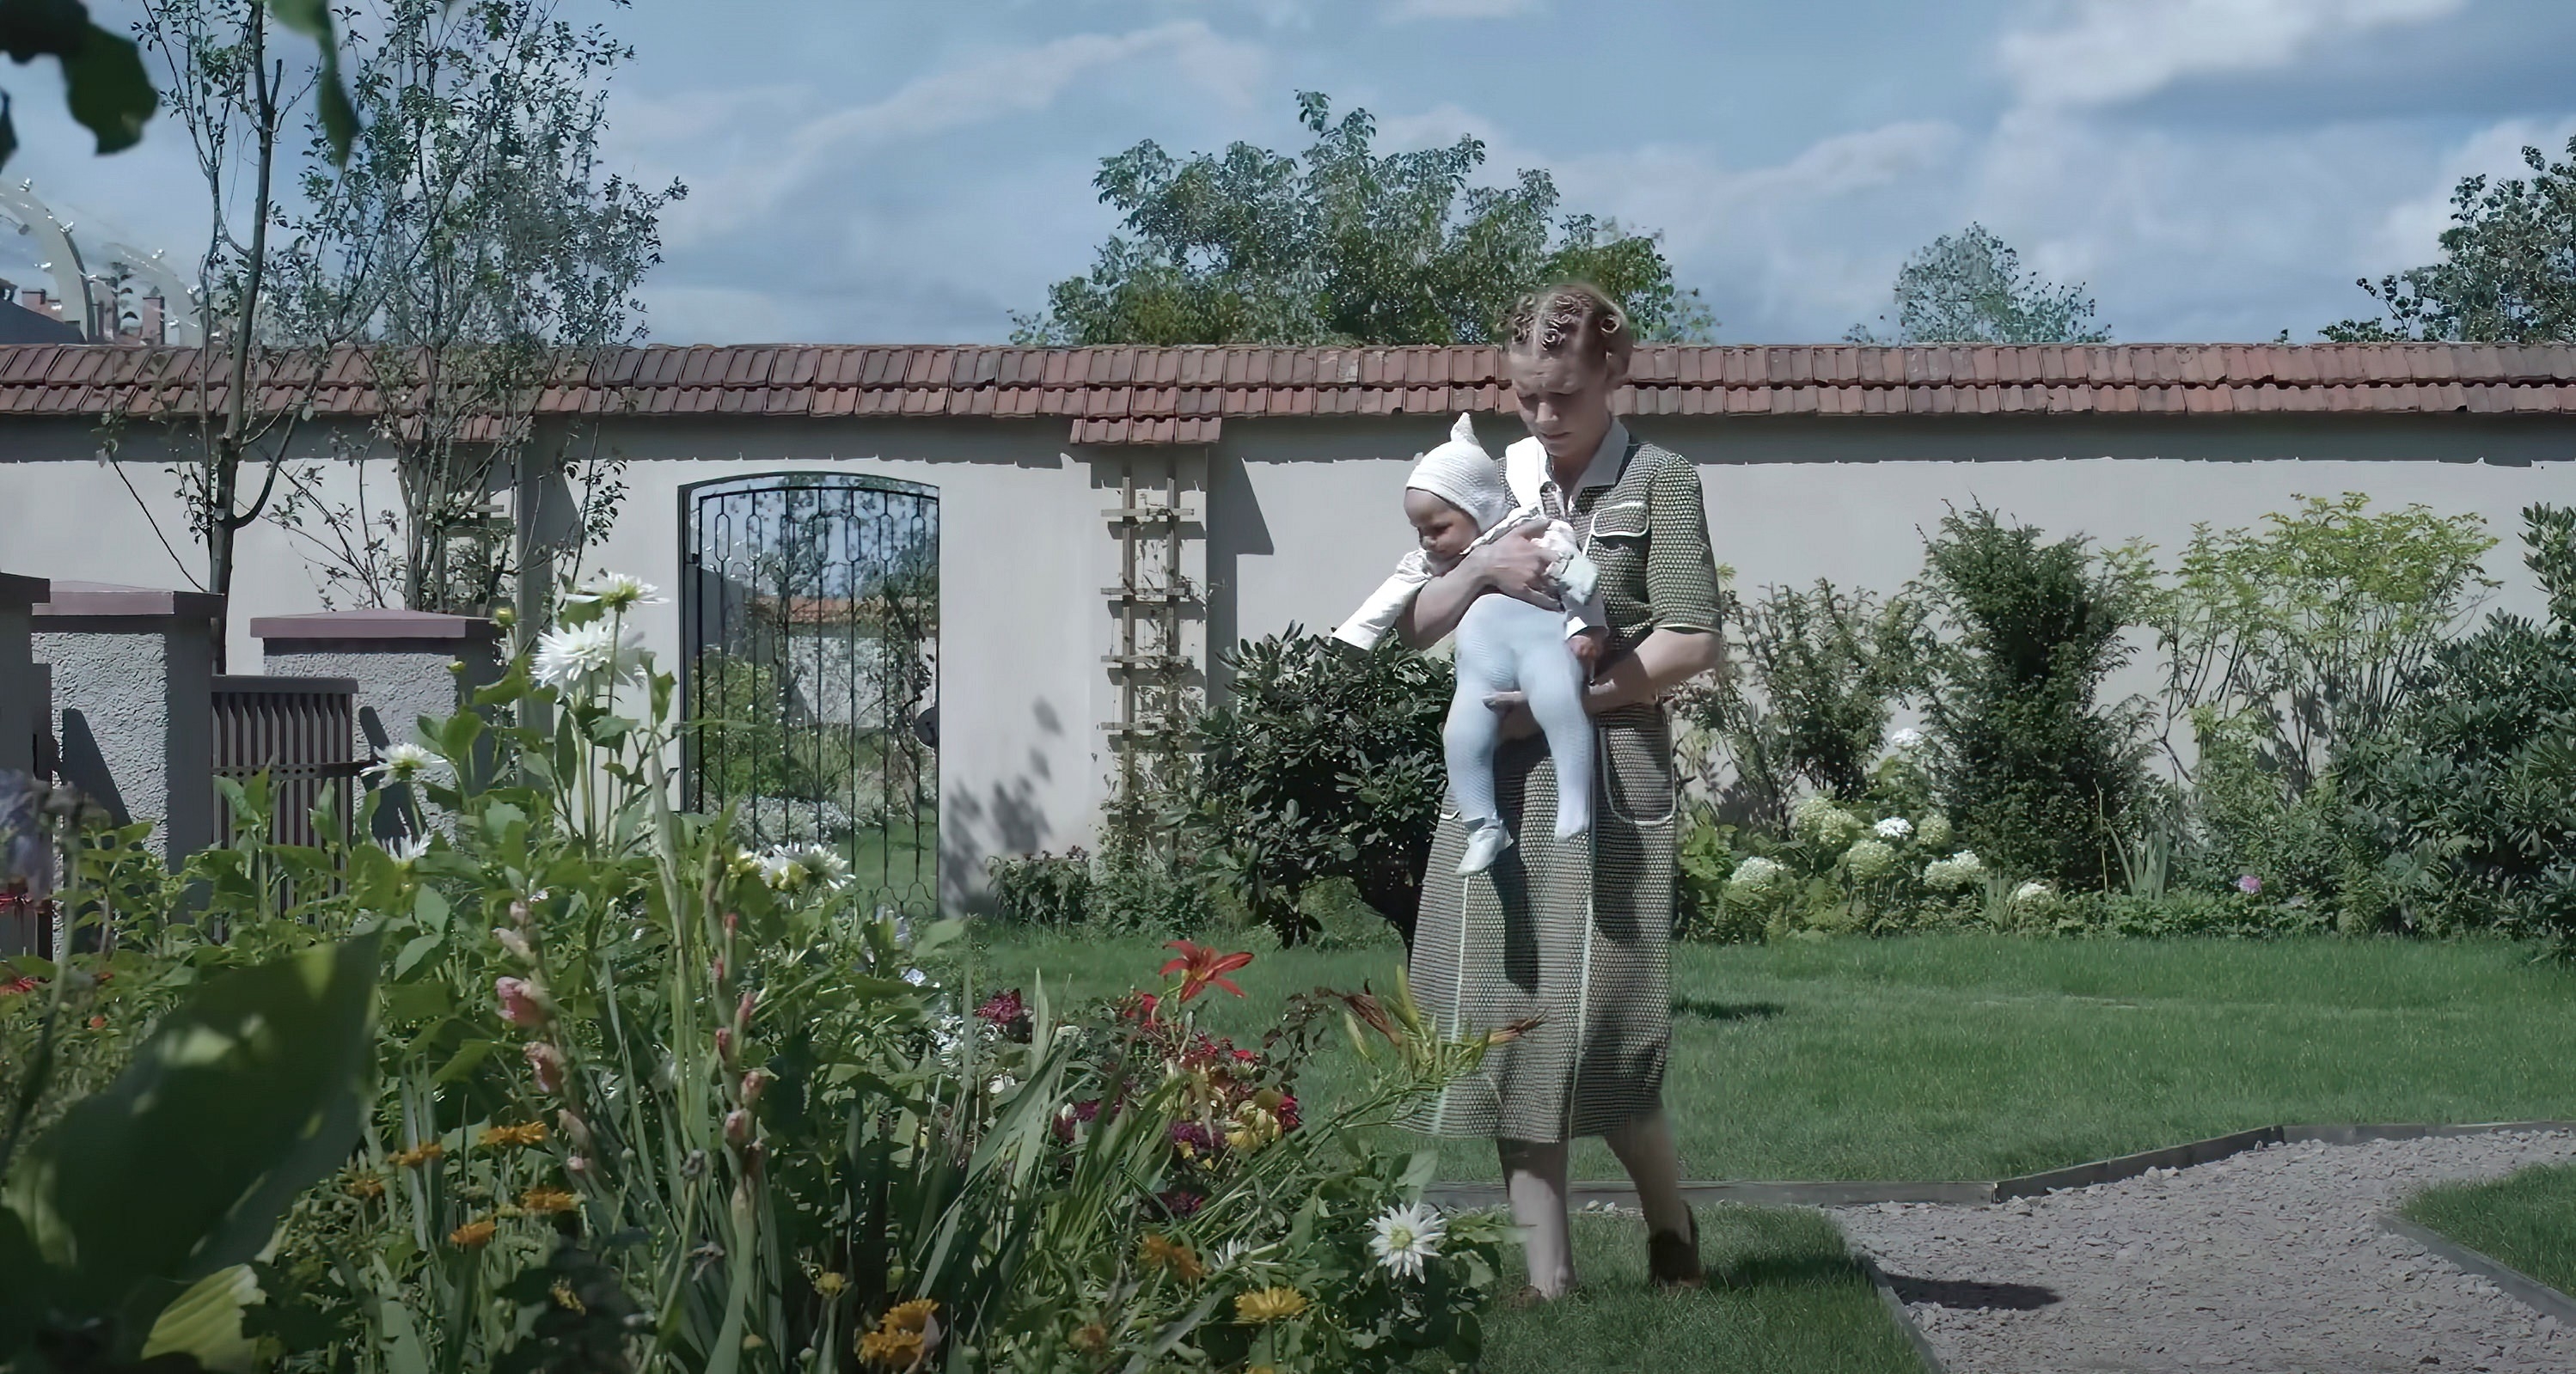 Sandra Hüller holding a baby while walking in a garden